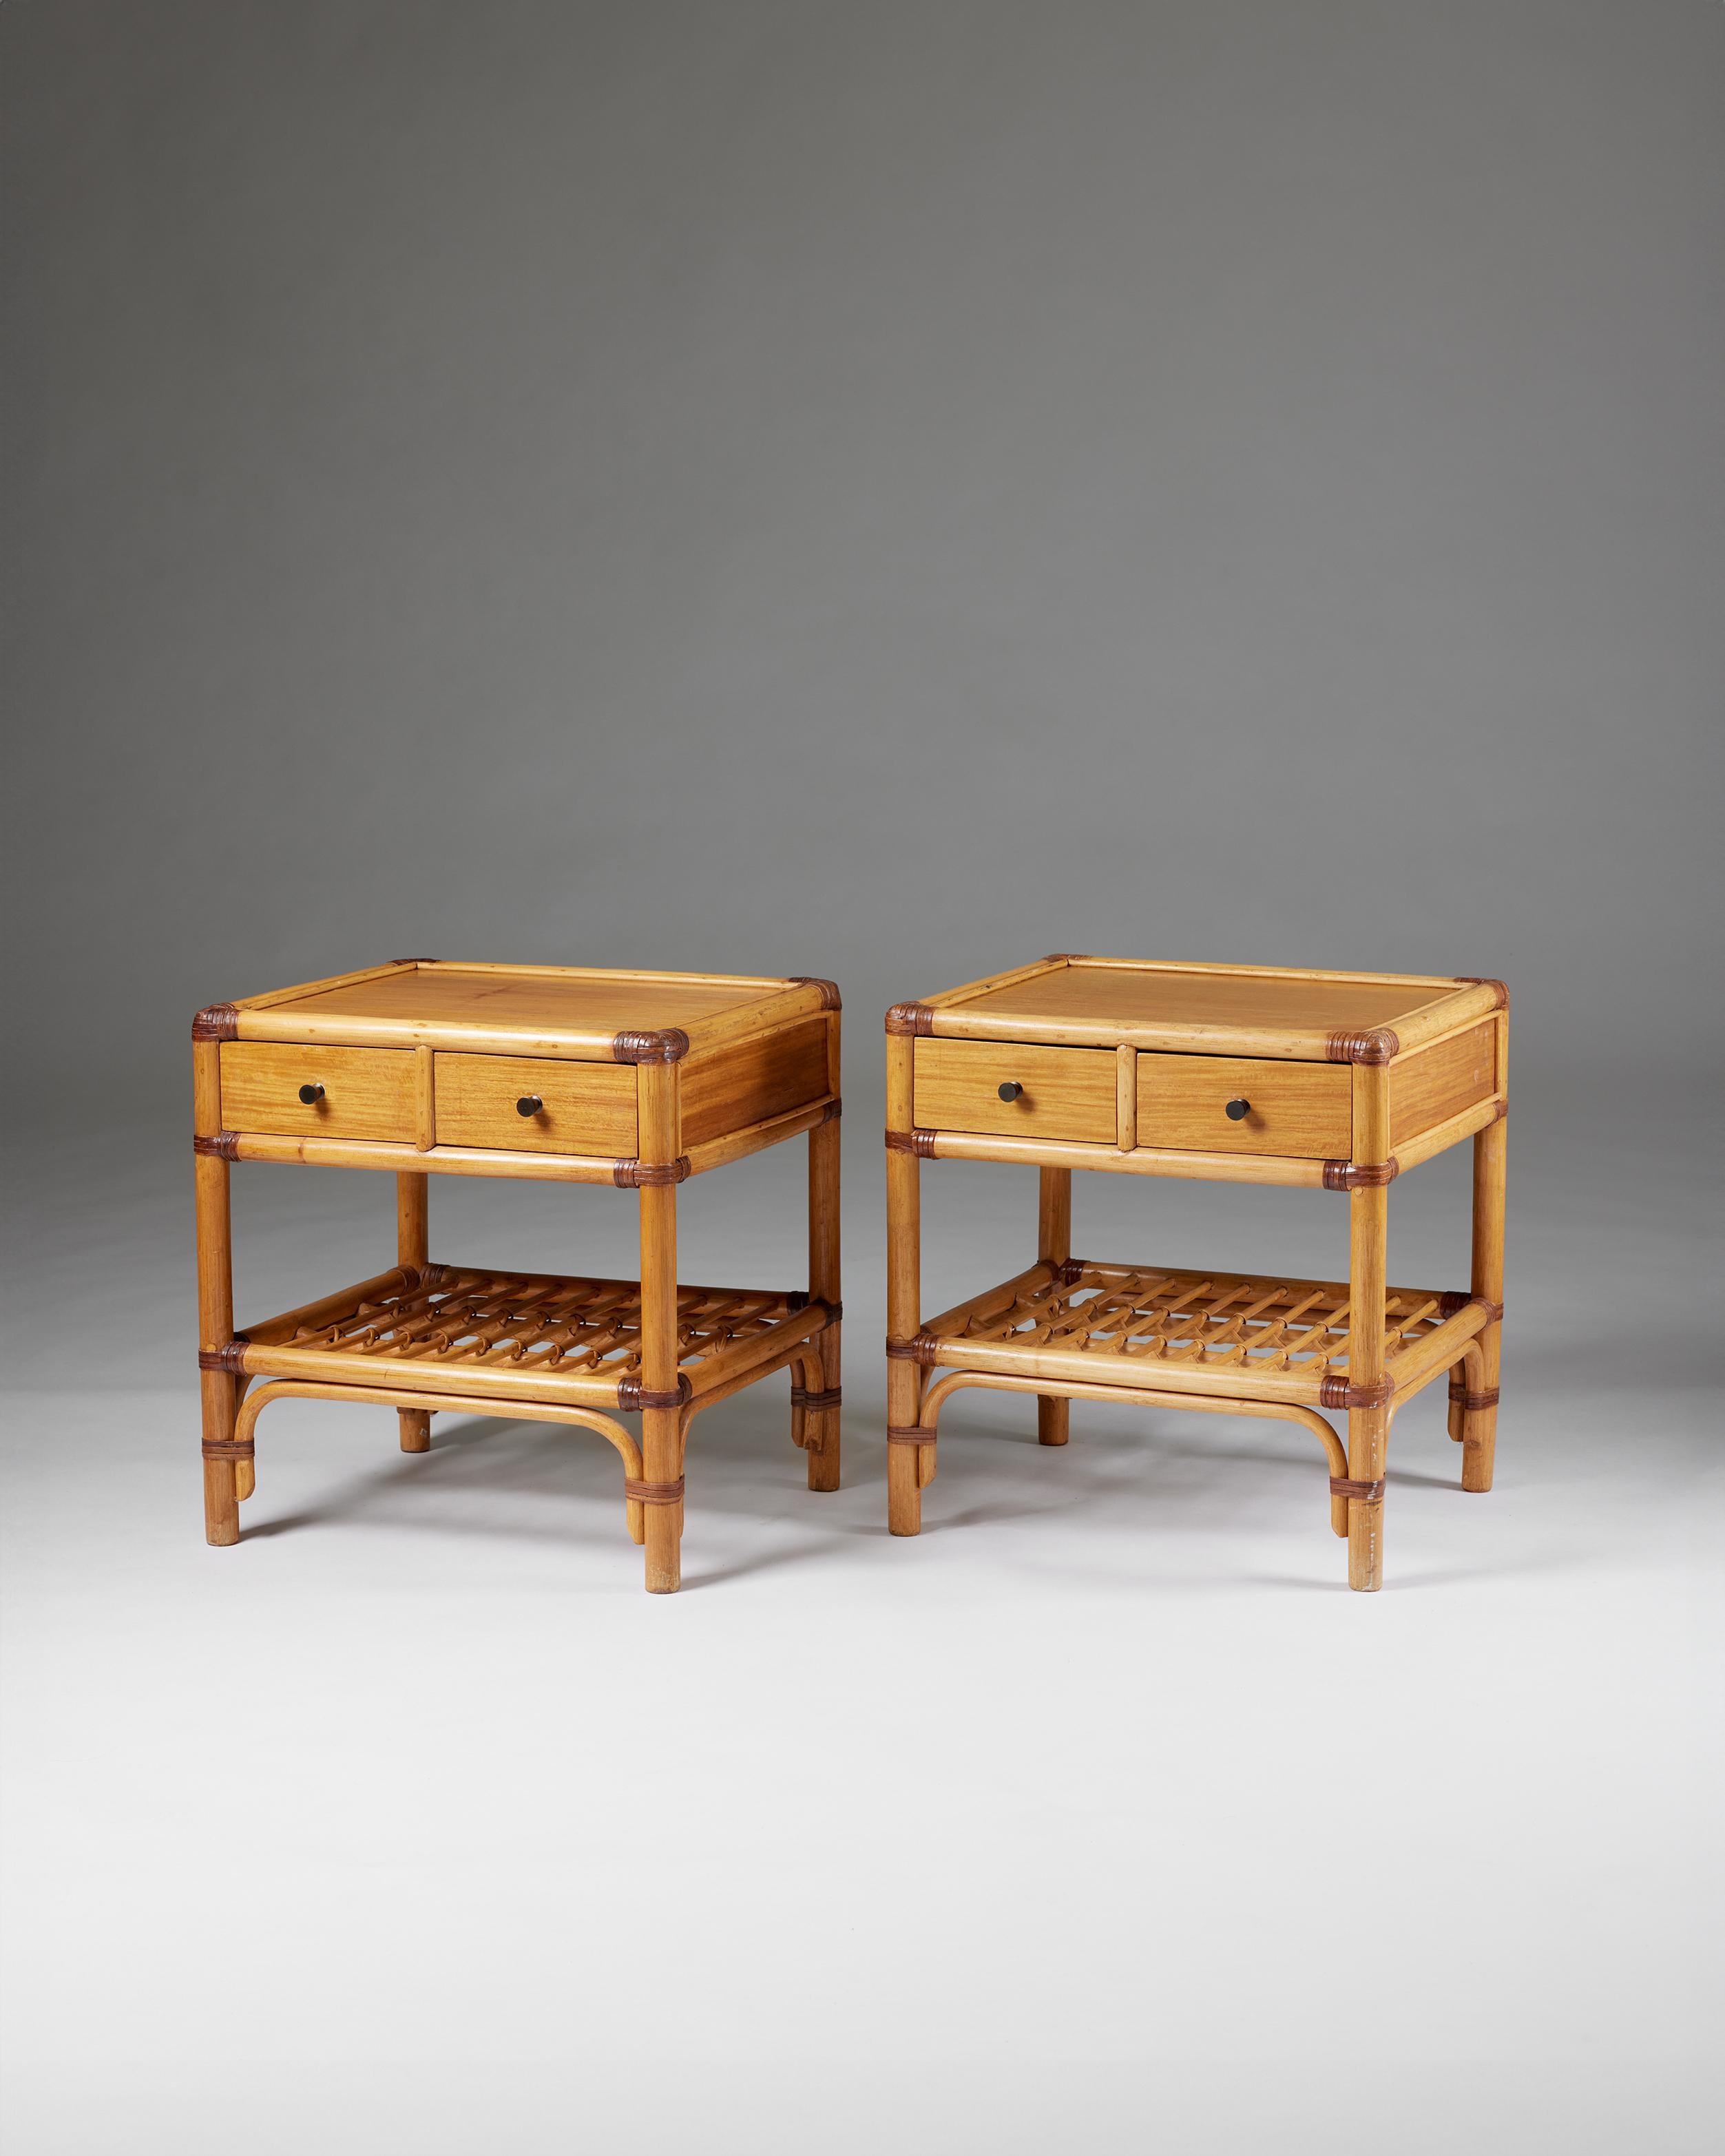 Pair of bedside tables, anonymous for DUX,
Sweden, 1960s.

Cane, rattan, teak and metal.

The colonial-style combination of bamboo, rattan, cane, and wood makes this Scandinavian bedside table design particularly interesting. The woven edges and